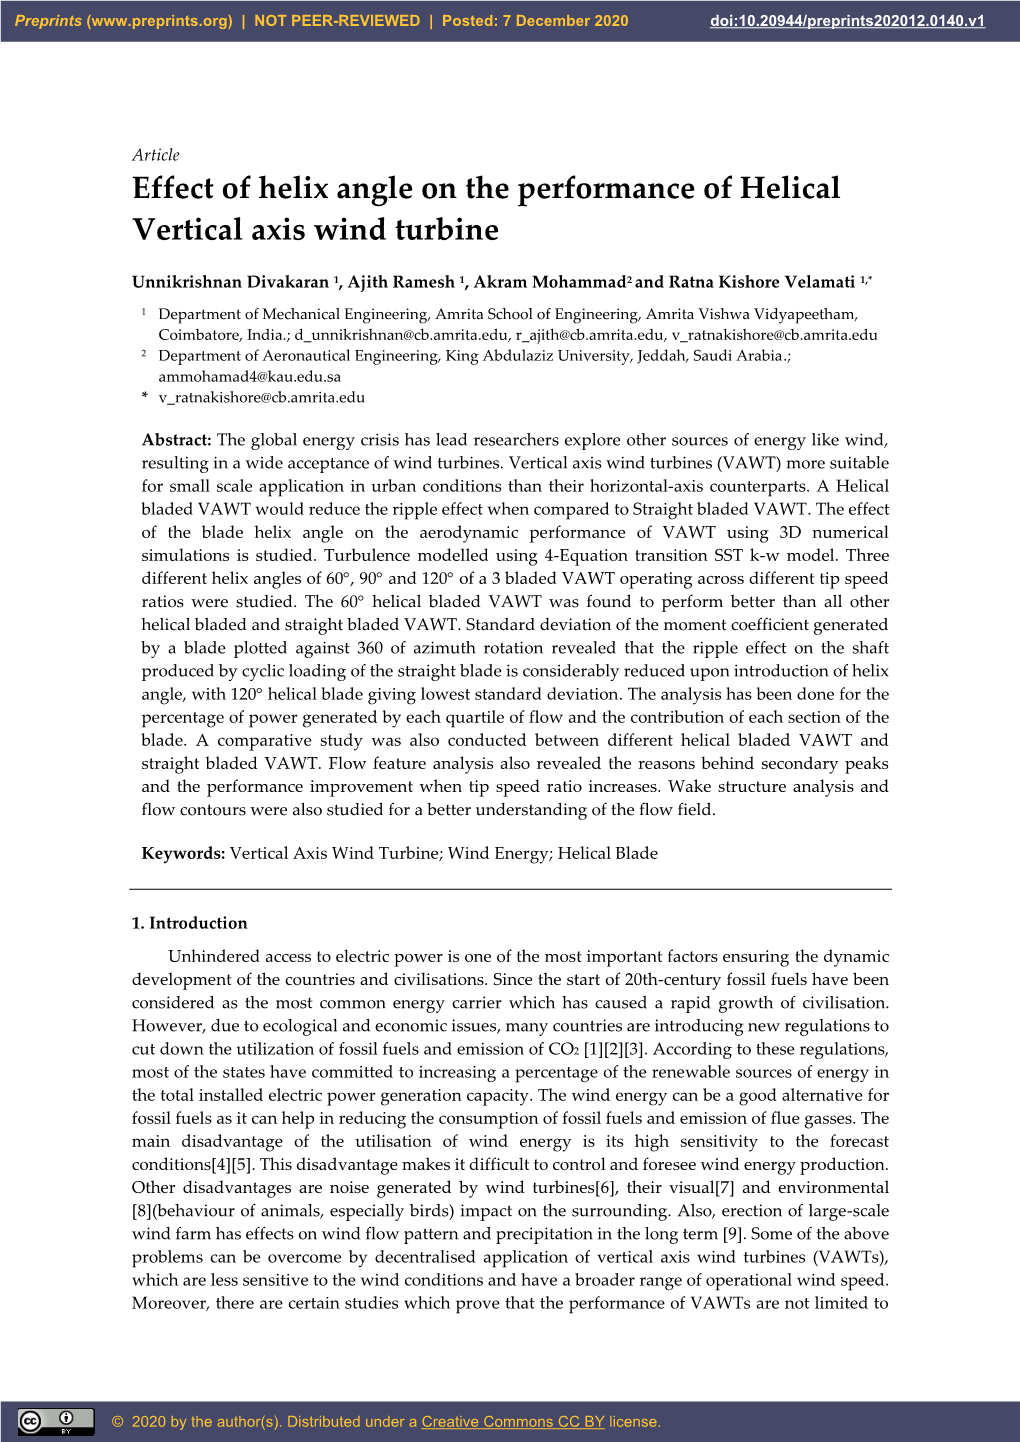 Effect of Helix Angle on the Performance of Helical Vertical Axis Wind Turbine